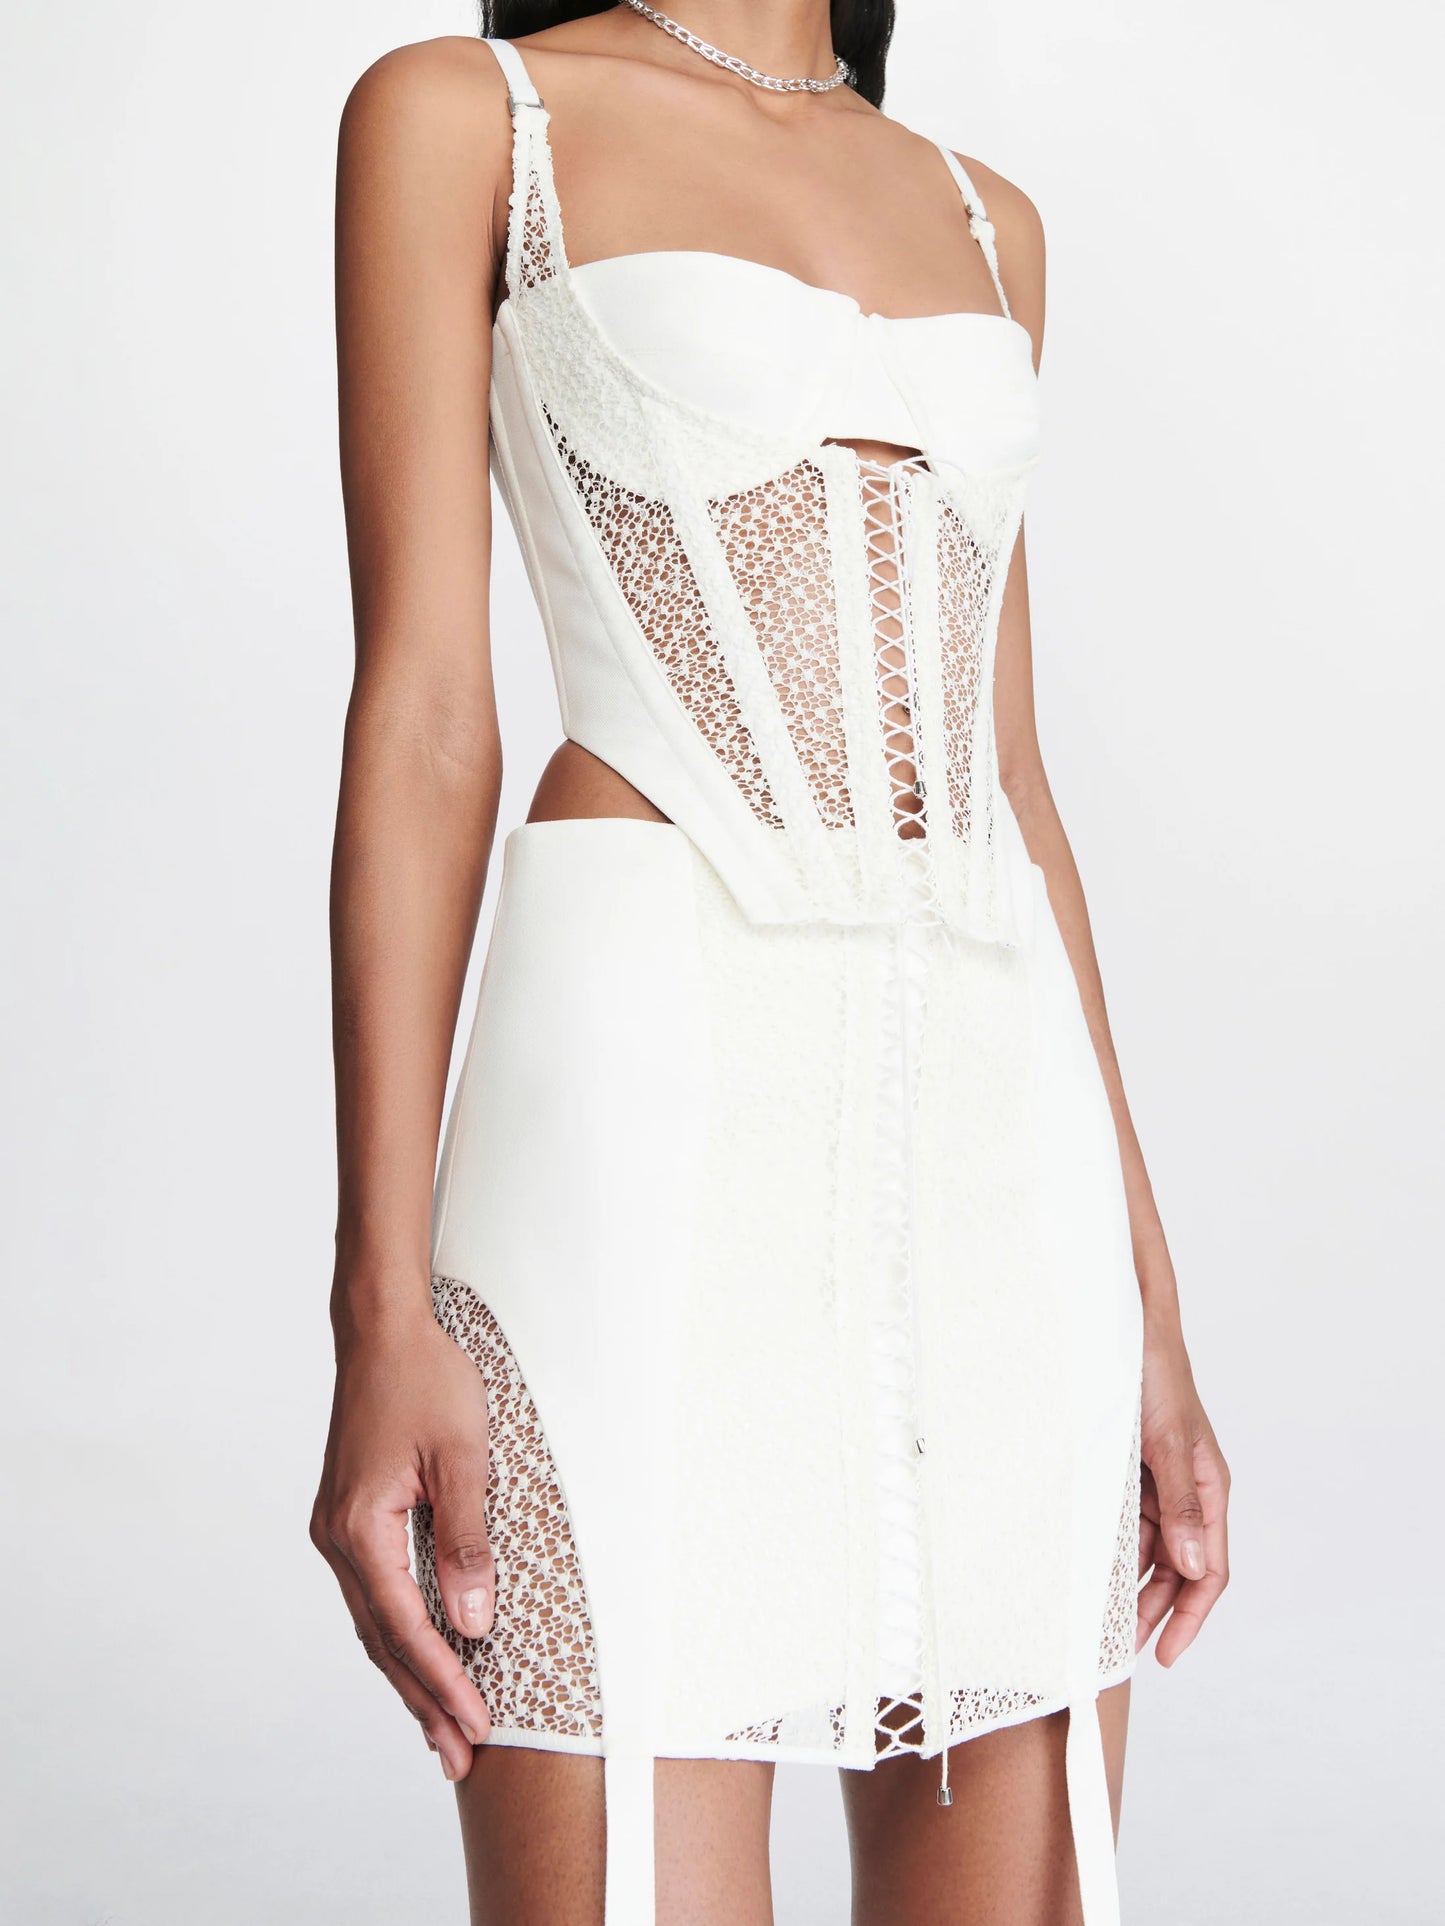 Dion Lee Lace Up Corset & Skirt